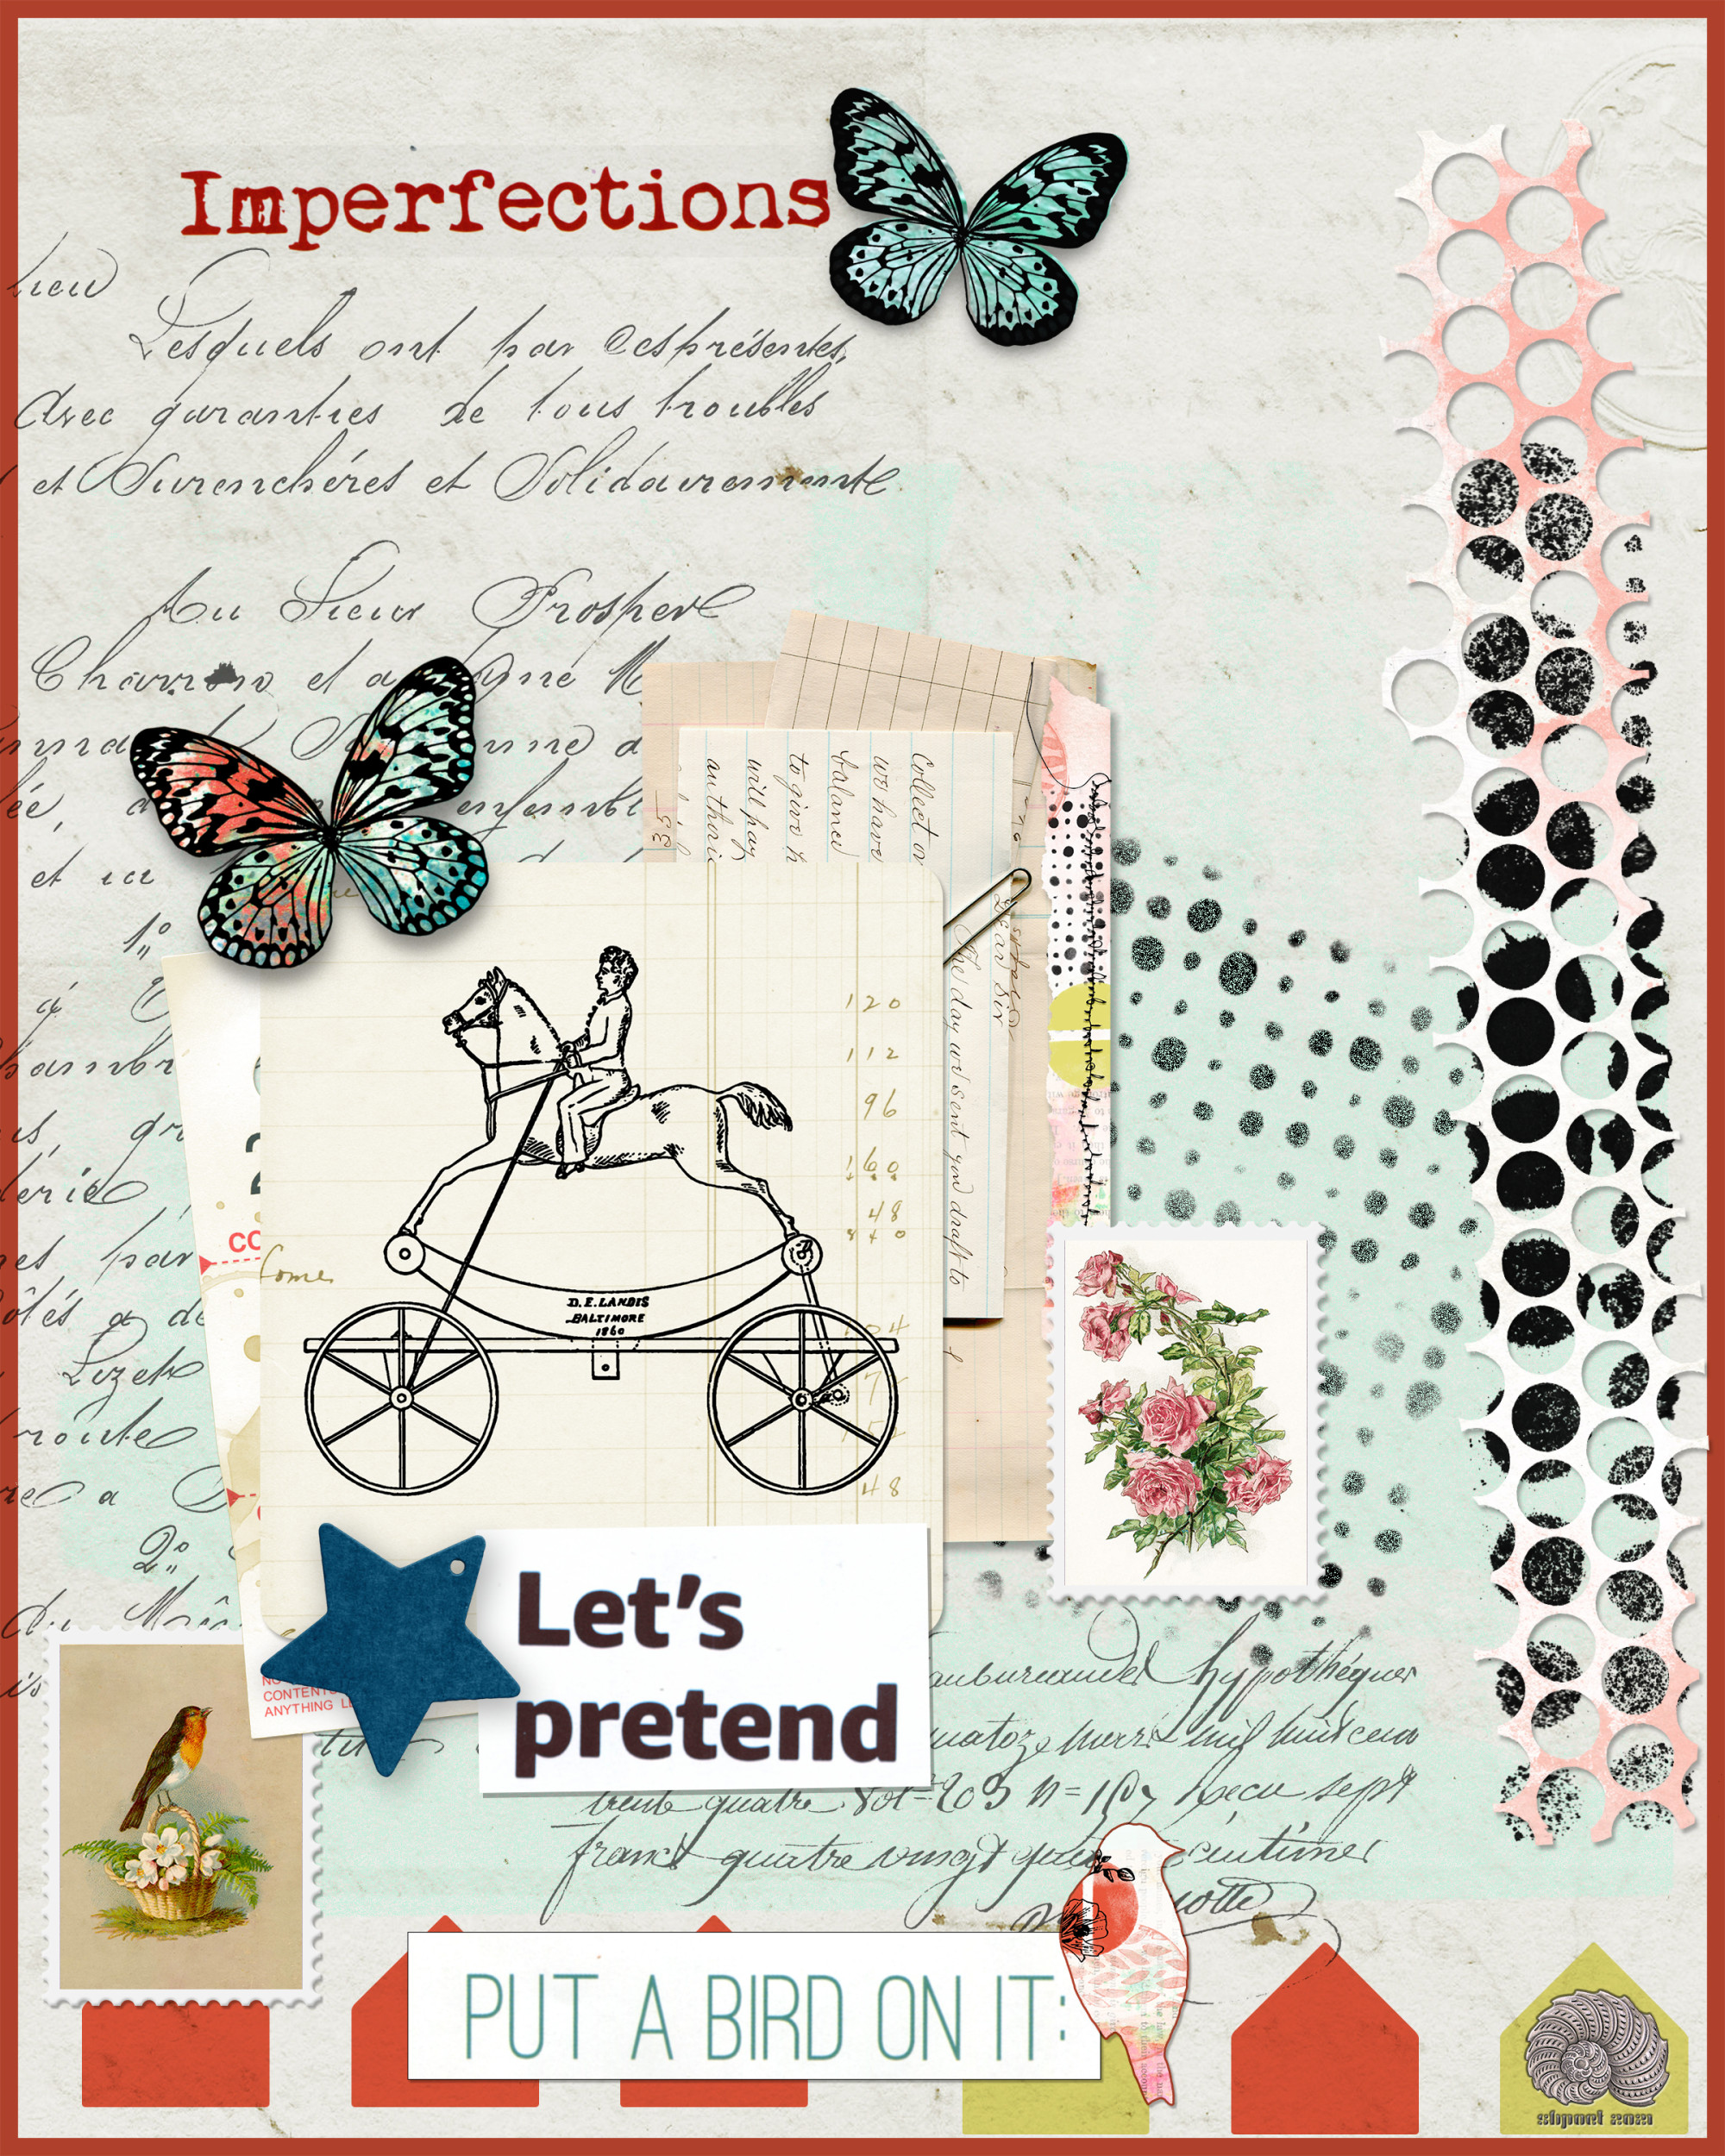 Junque Journal O2 Digital Scrapbook by Vicki Robinson Sample Page by sbpoet 02